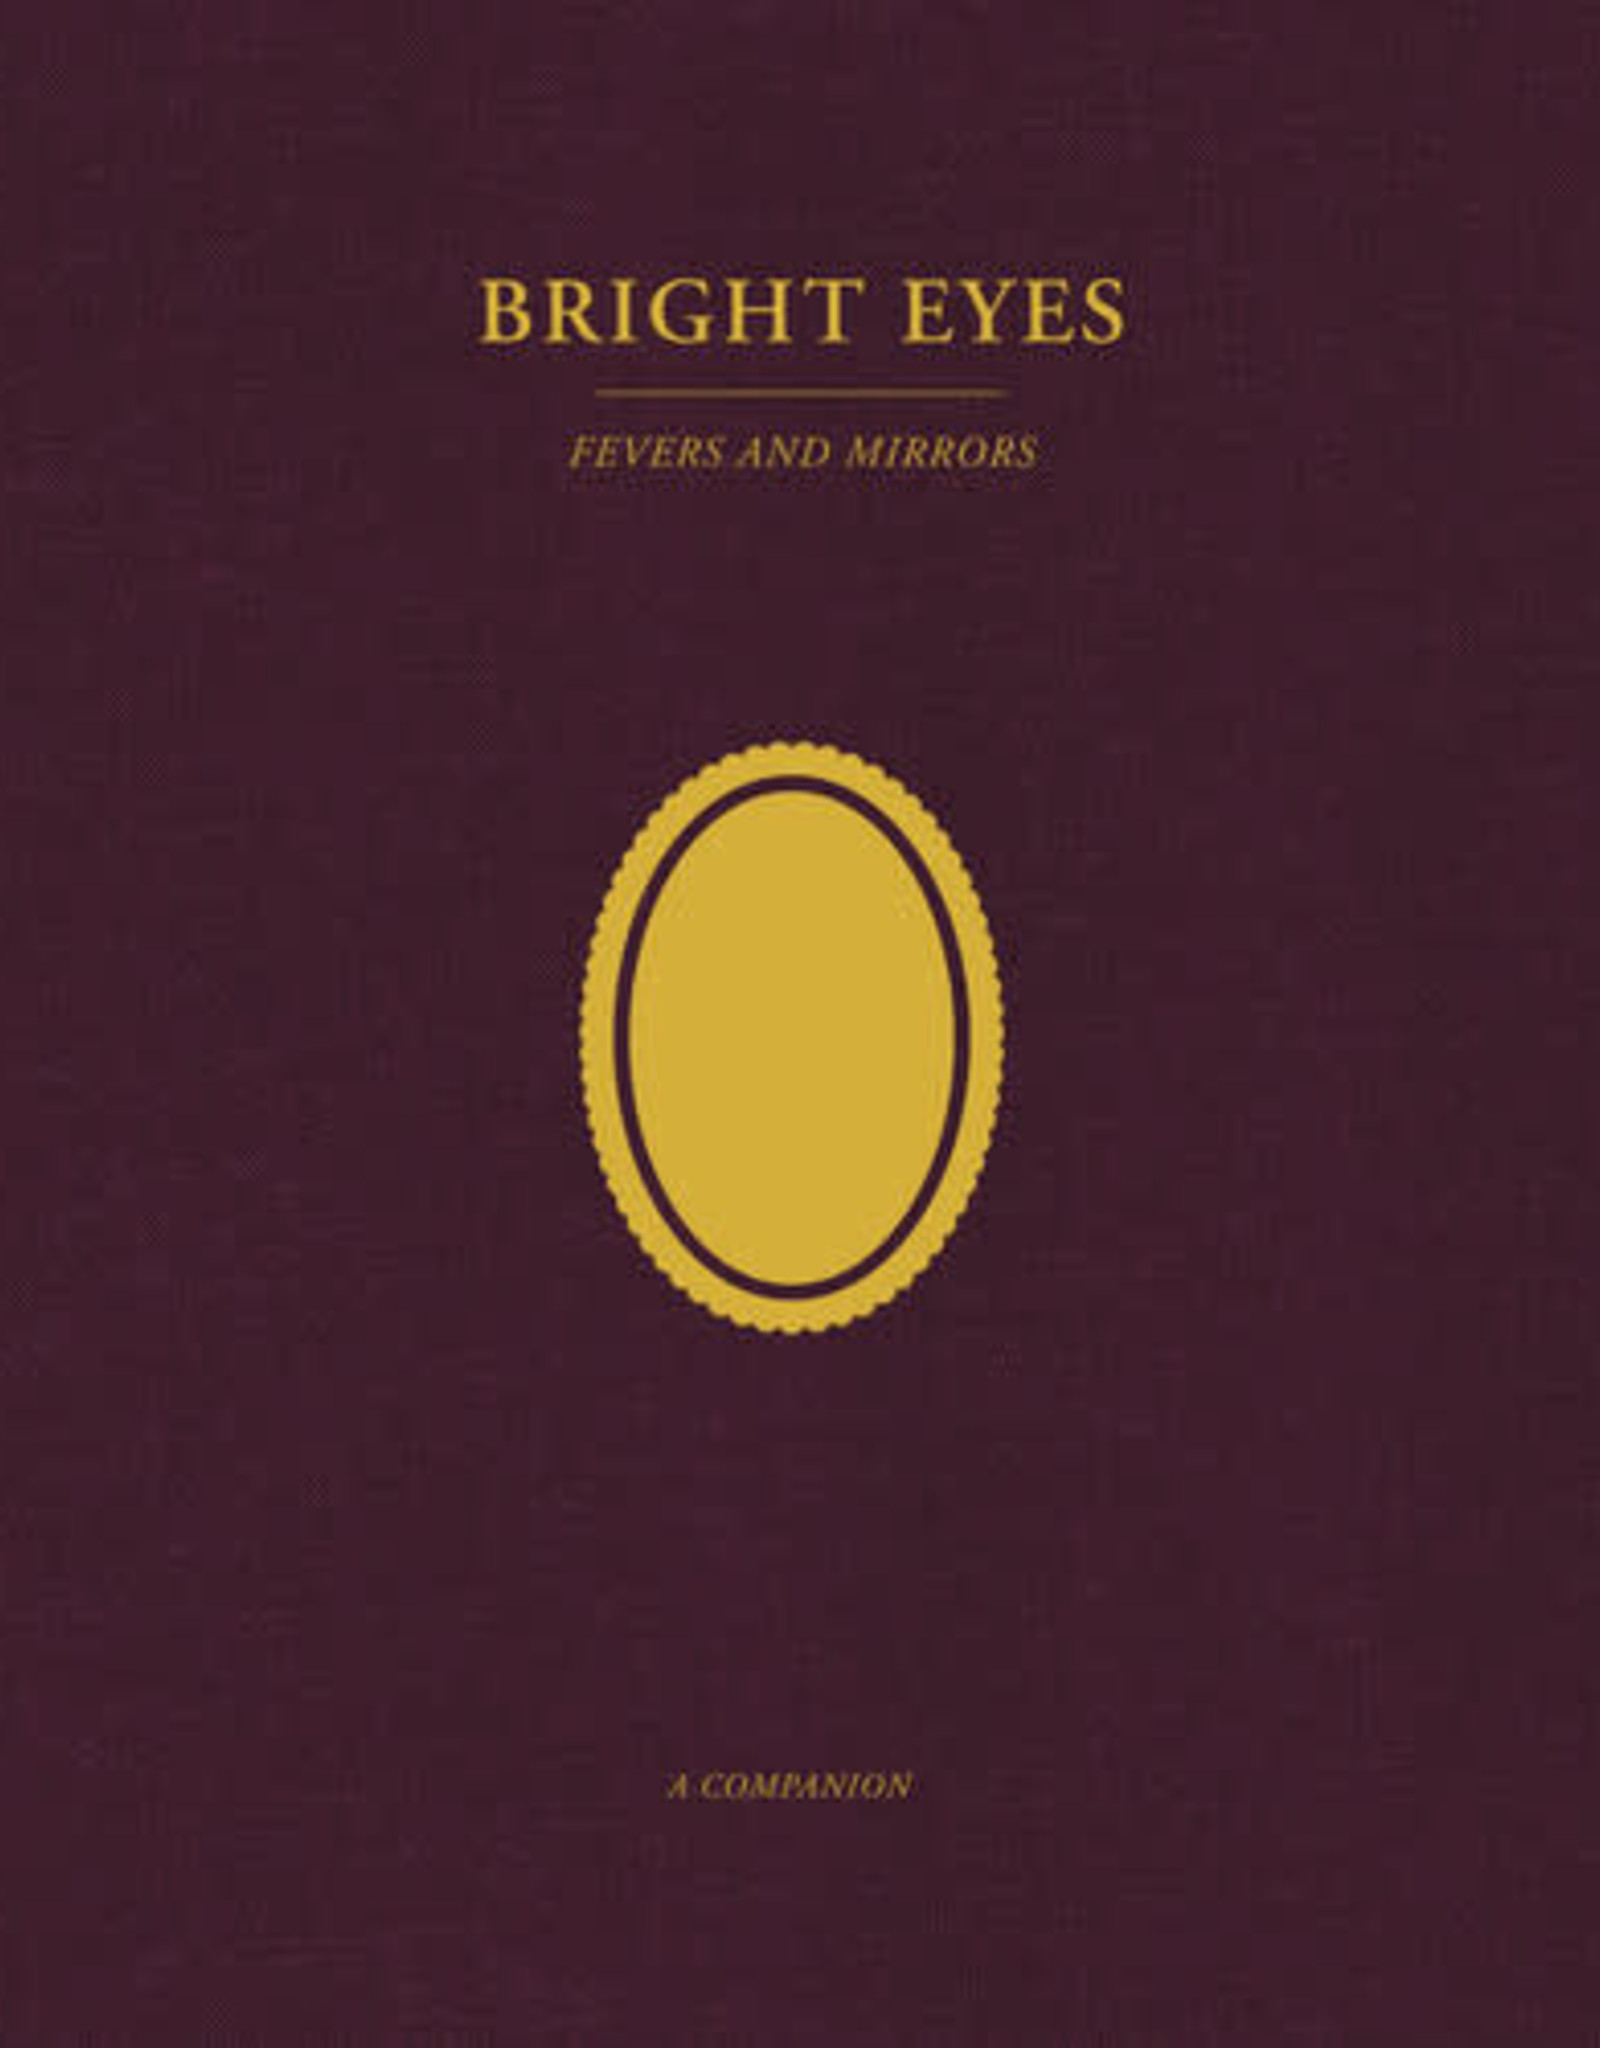 Bright Eyes - Fevers and Mirrors: A Companion (Opaque Gold)